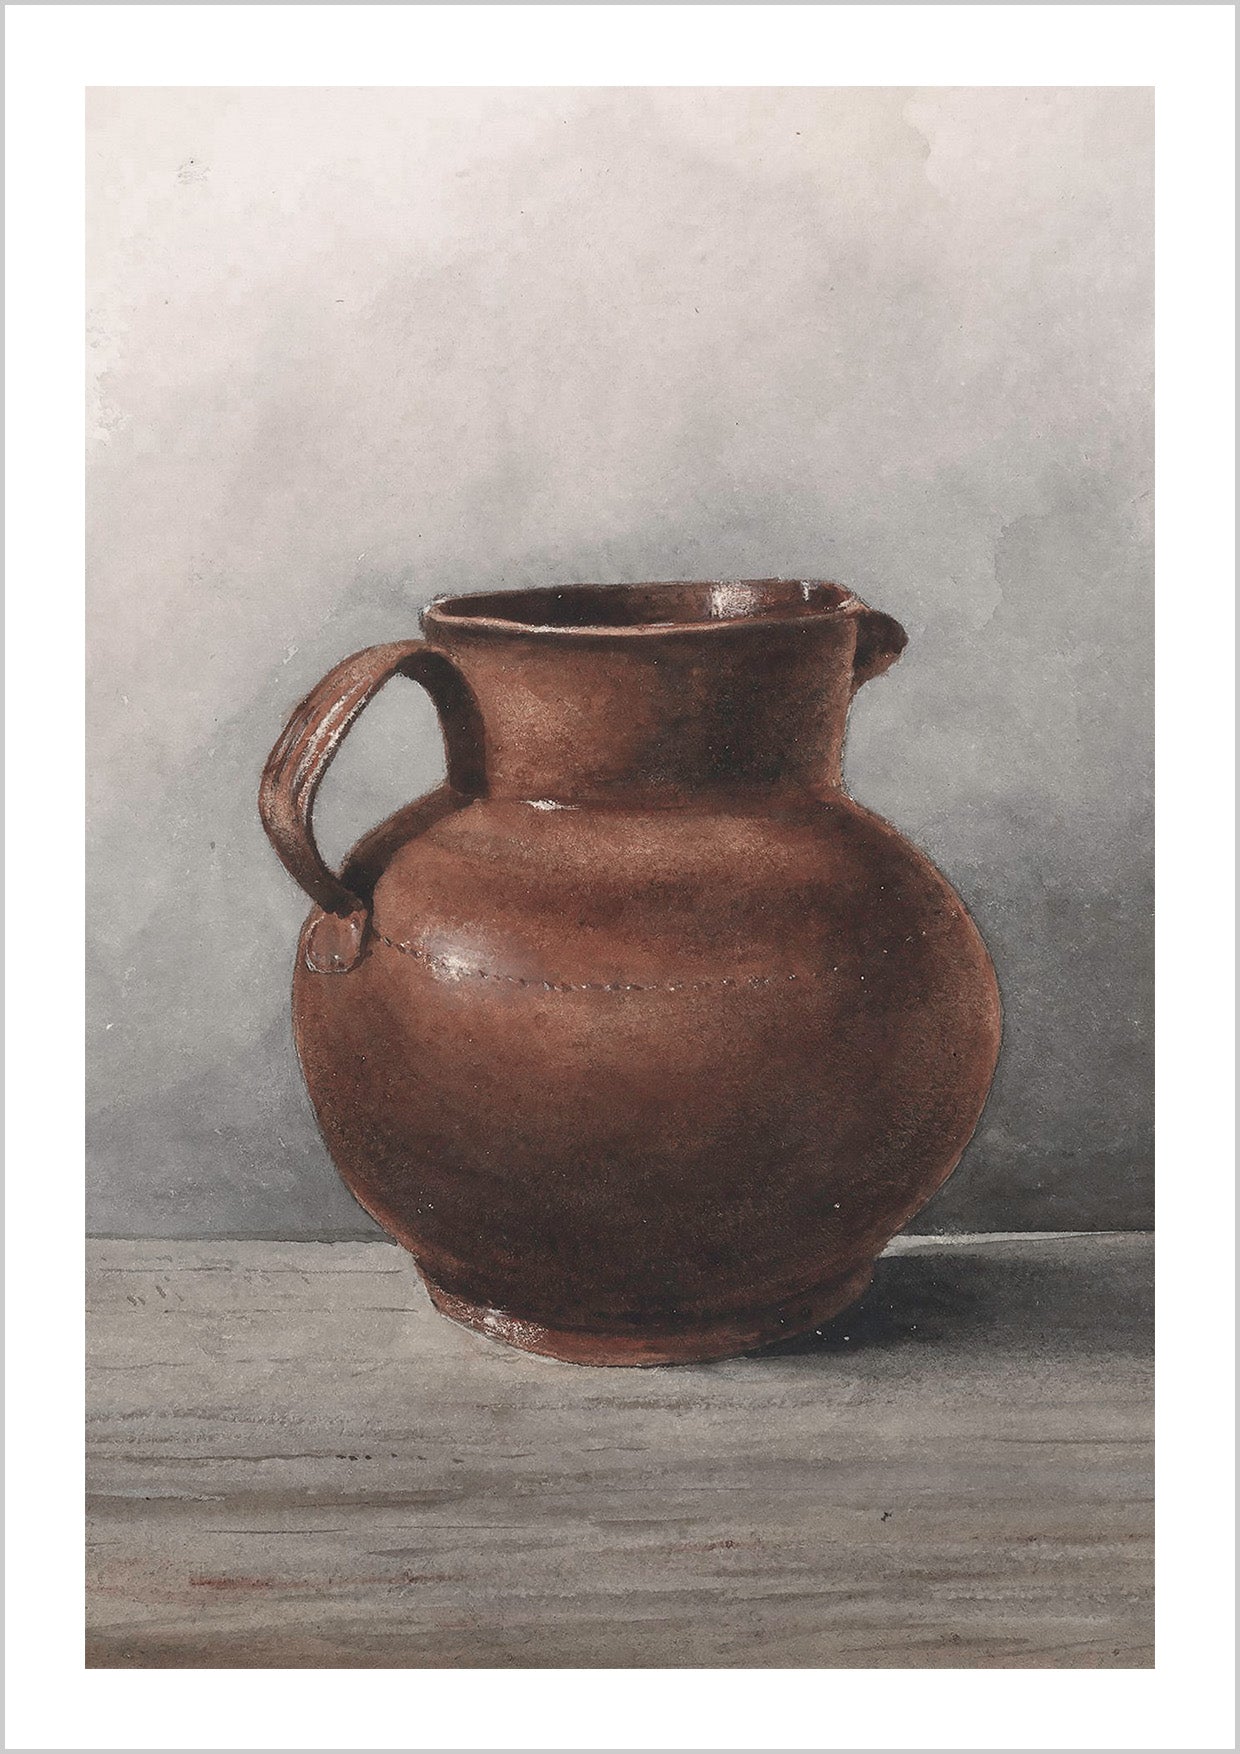 Still Life A Jug was created by the British artist George Jackson 